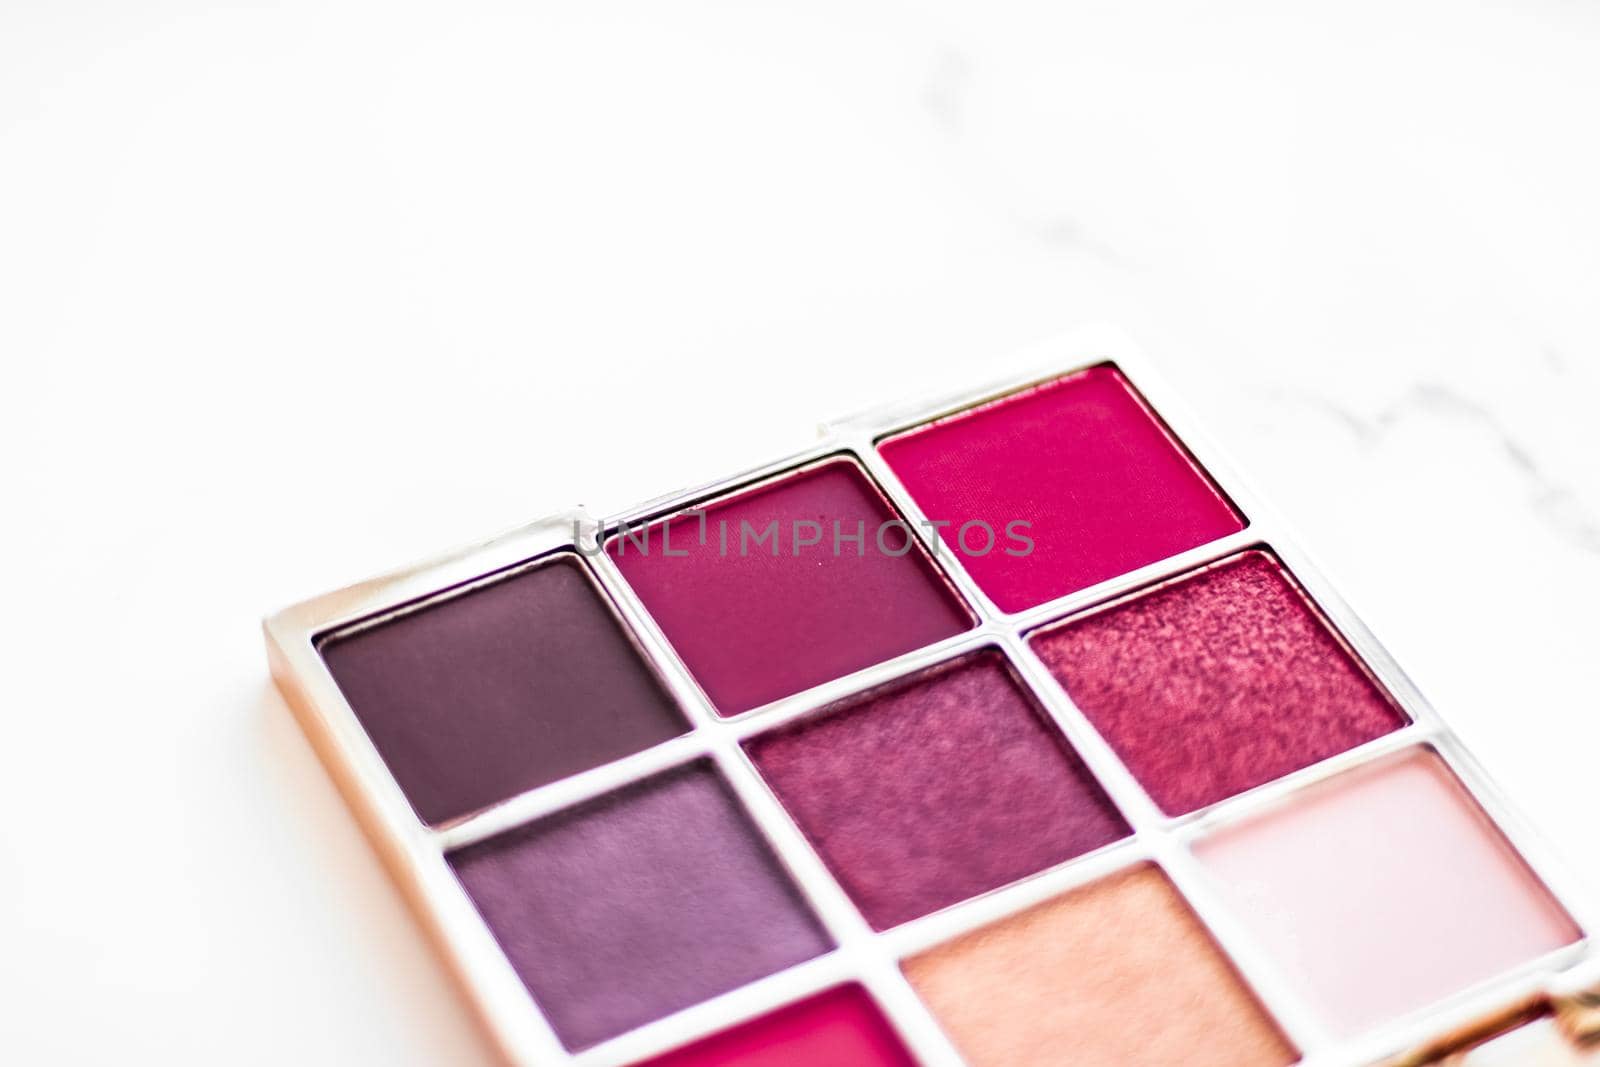 Cosmetic branding, fashion blog and glamour set concept - Eye shadow palette swatches on marble background, make-up and eyeshadows cosmetics product for luxury beauty brand and holiday flatlay design